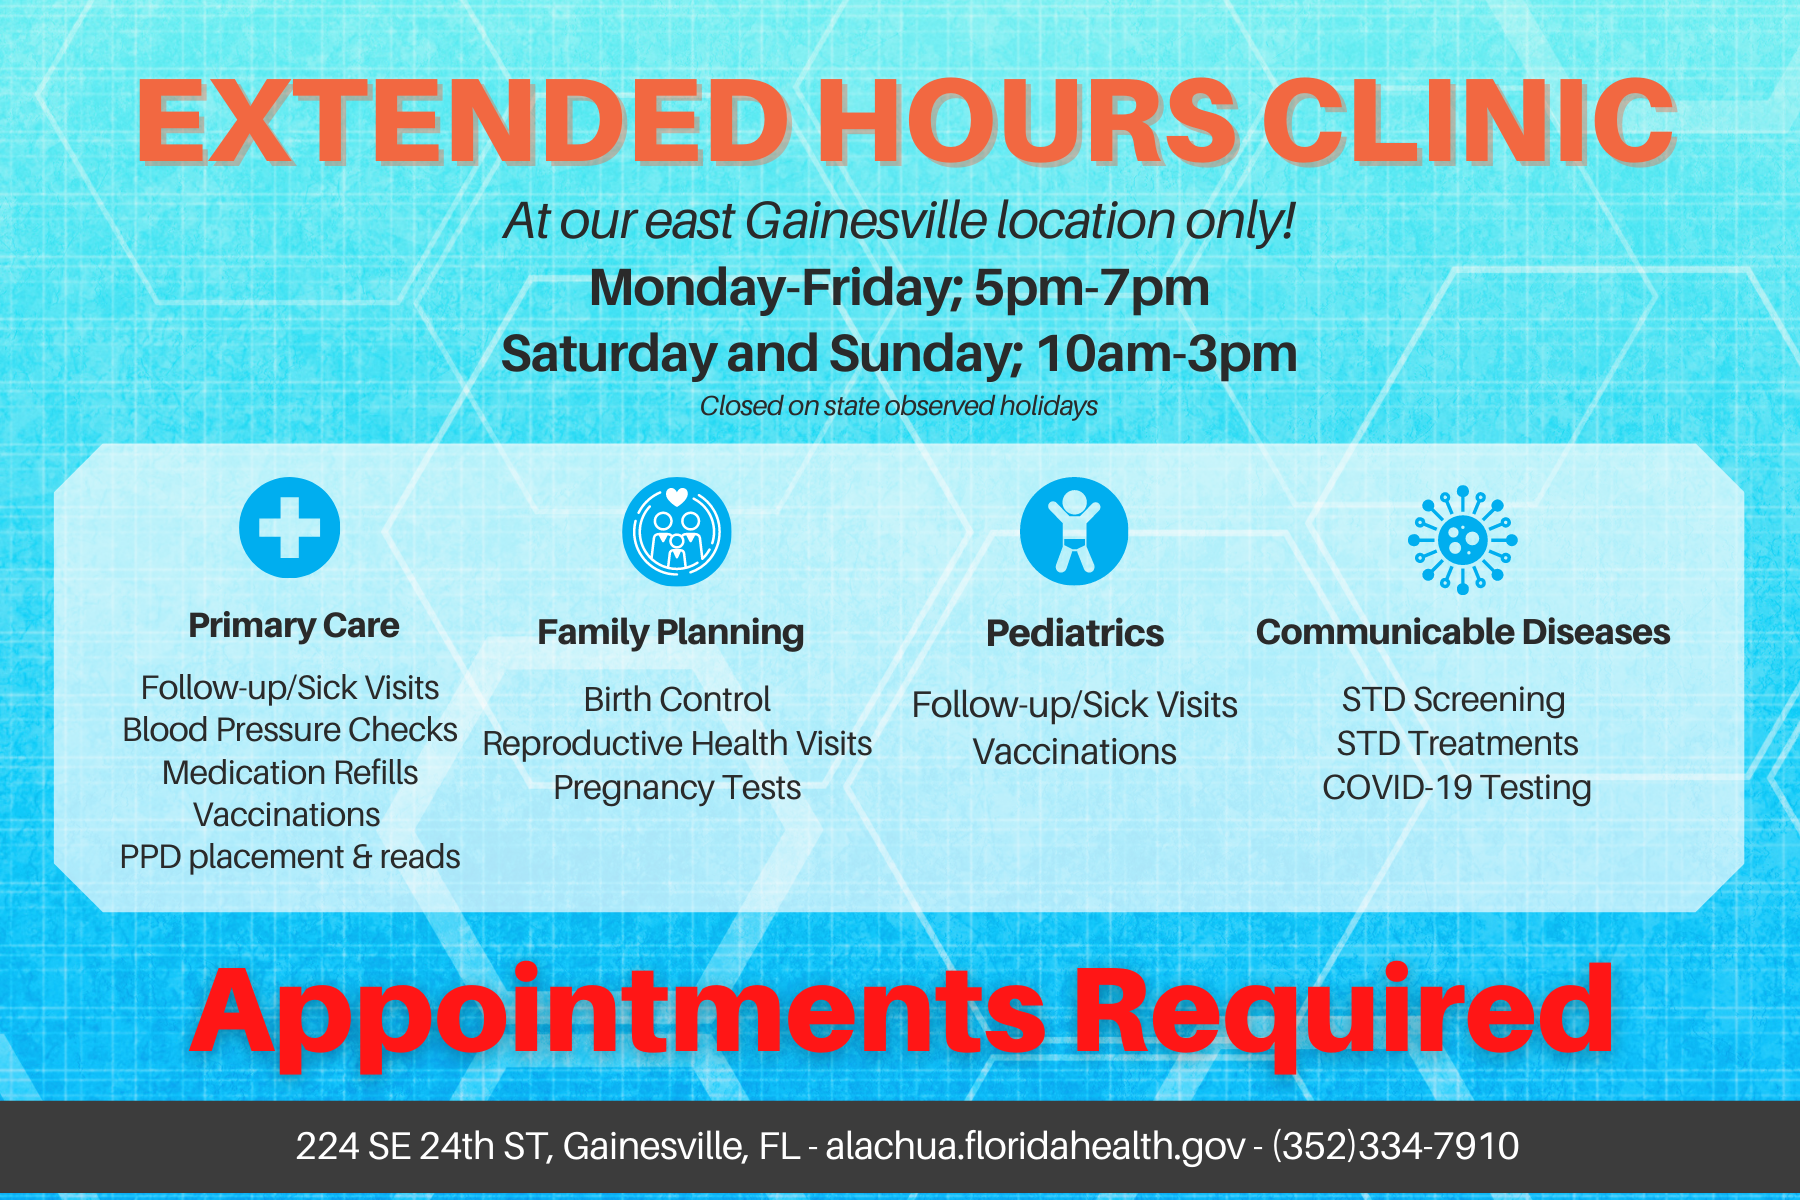 Extended Hours Clinic at our east gainesville location only. Monday - Friday 5pm to 7pm Saturday and Sunday 10am to 3pm closed on state observed  holidays appointments required